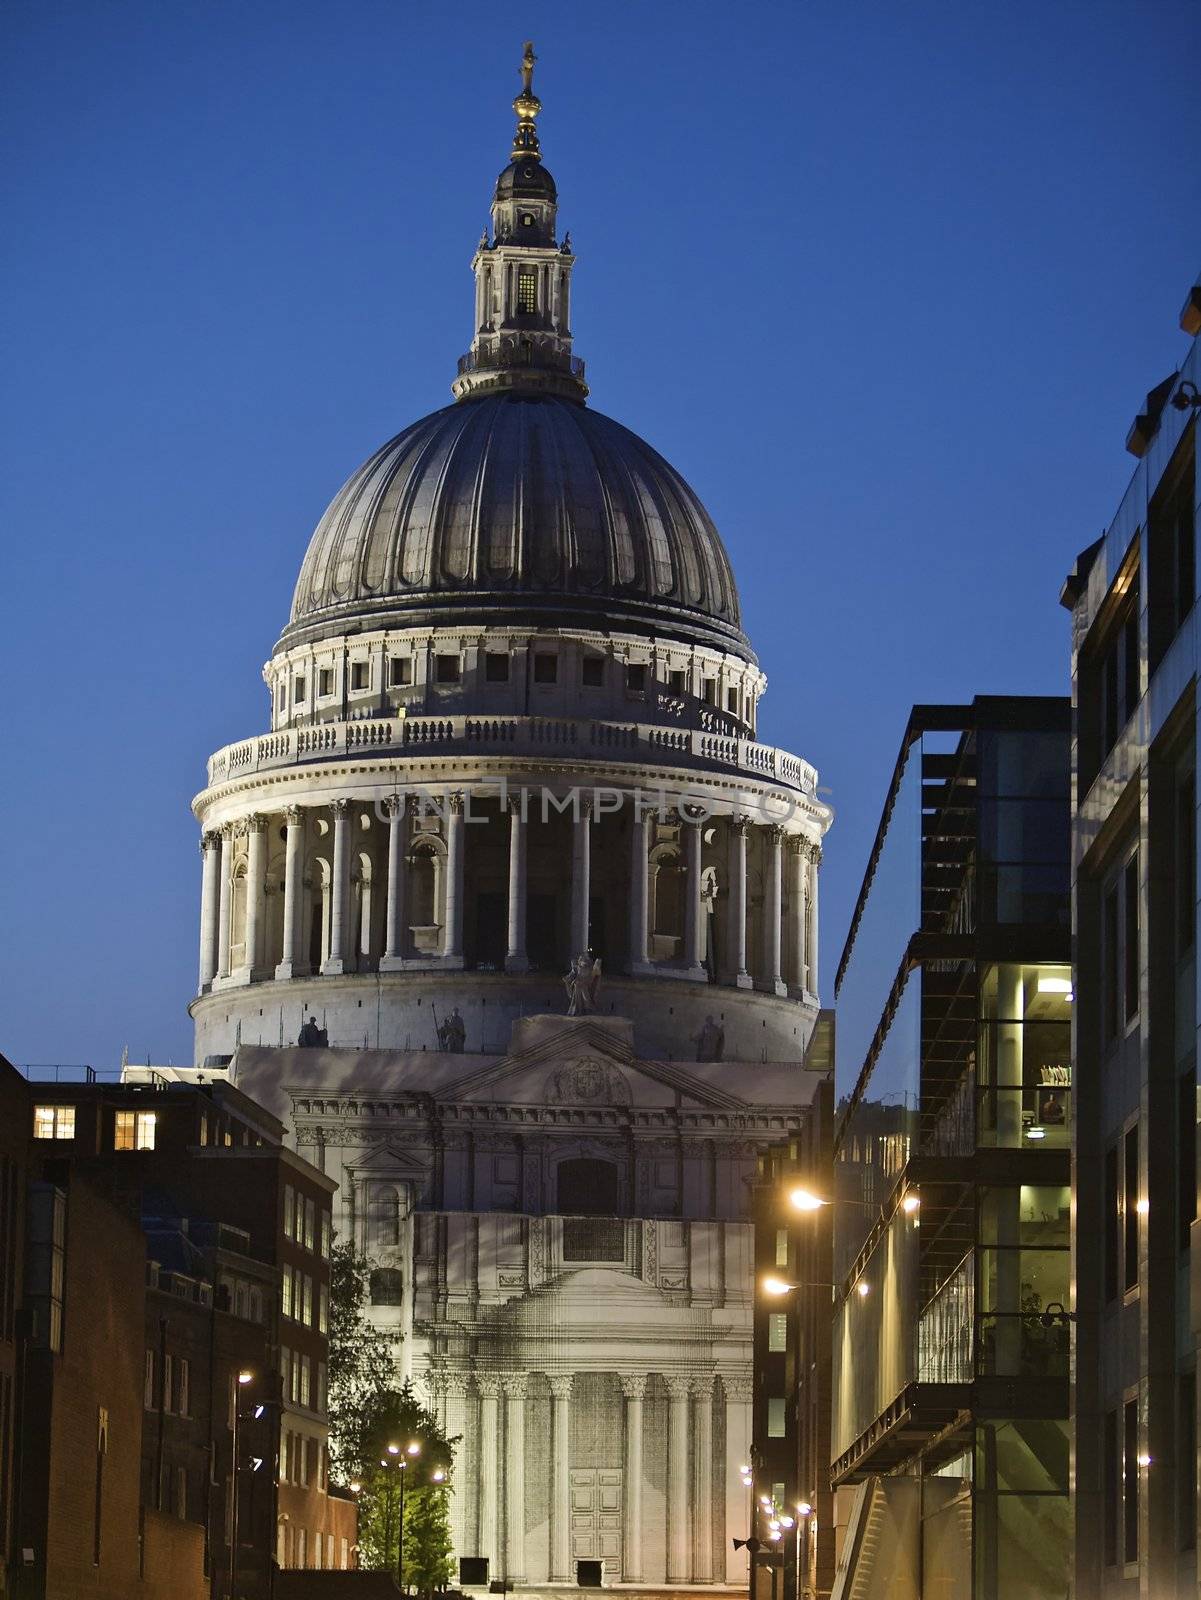 St Paul's Church at Night by instinia